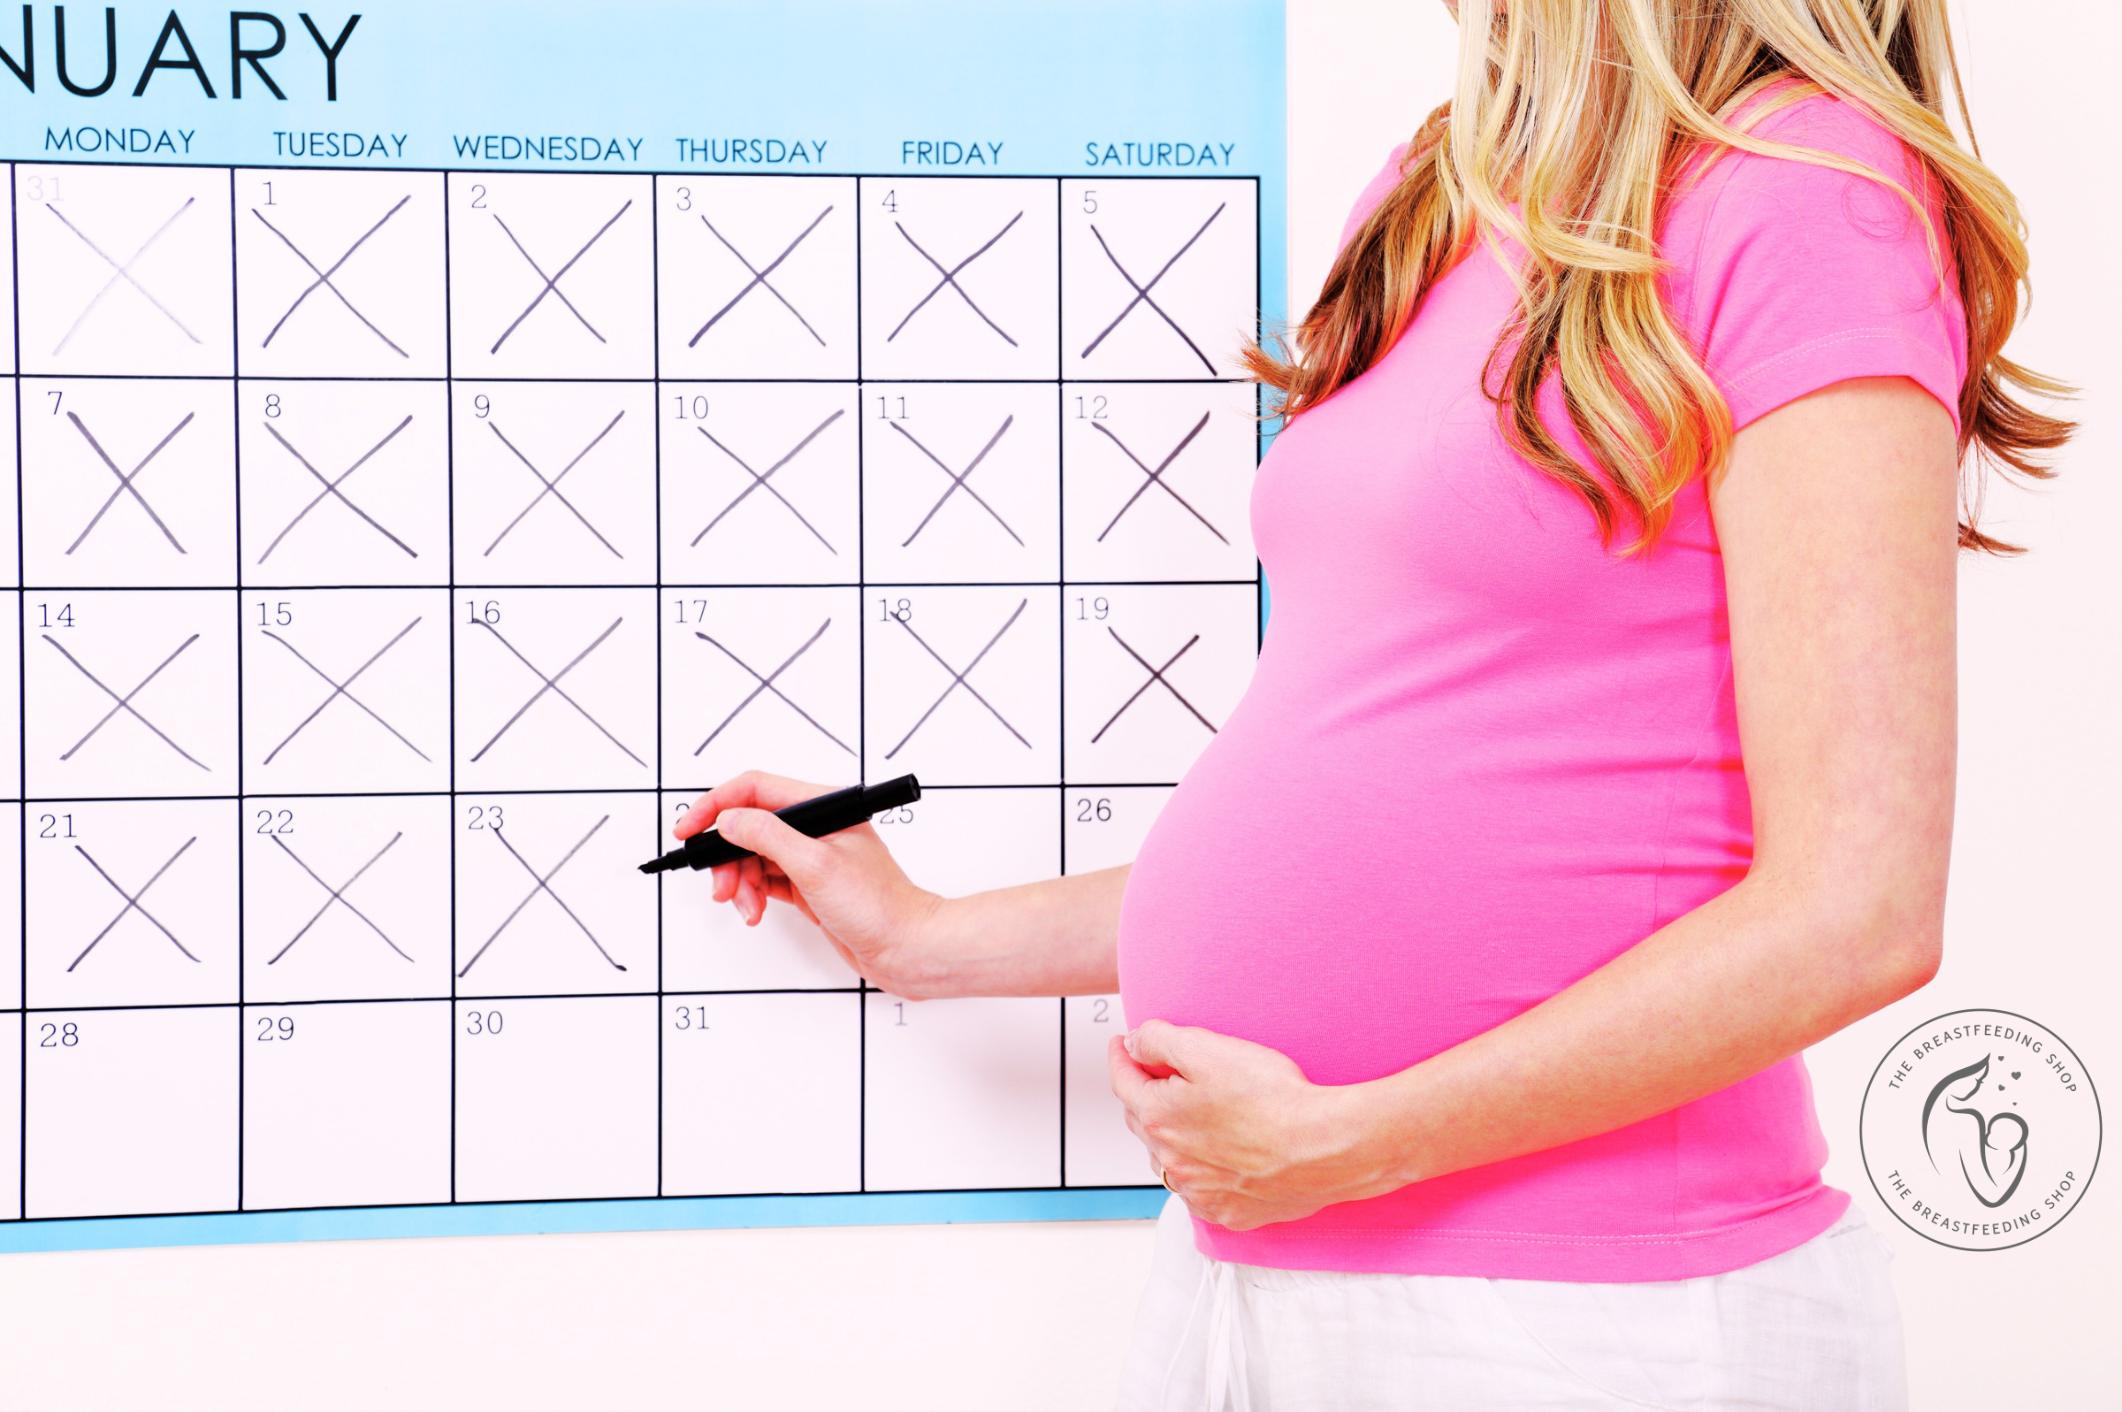 Pregnant mother tracking her due date on her calendar